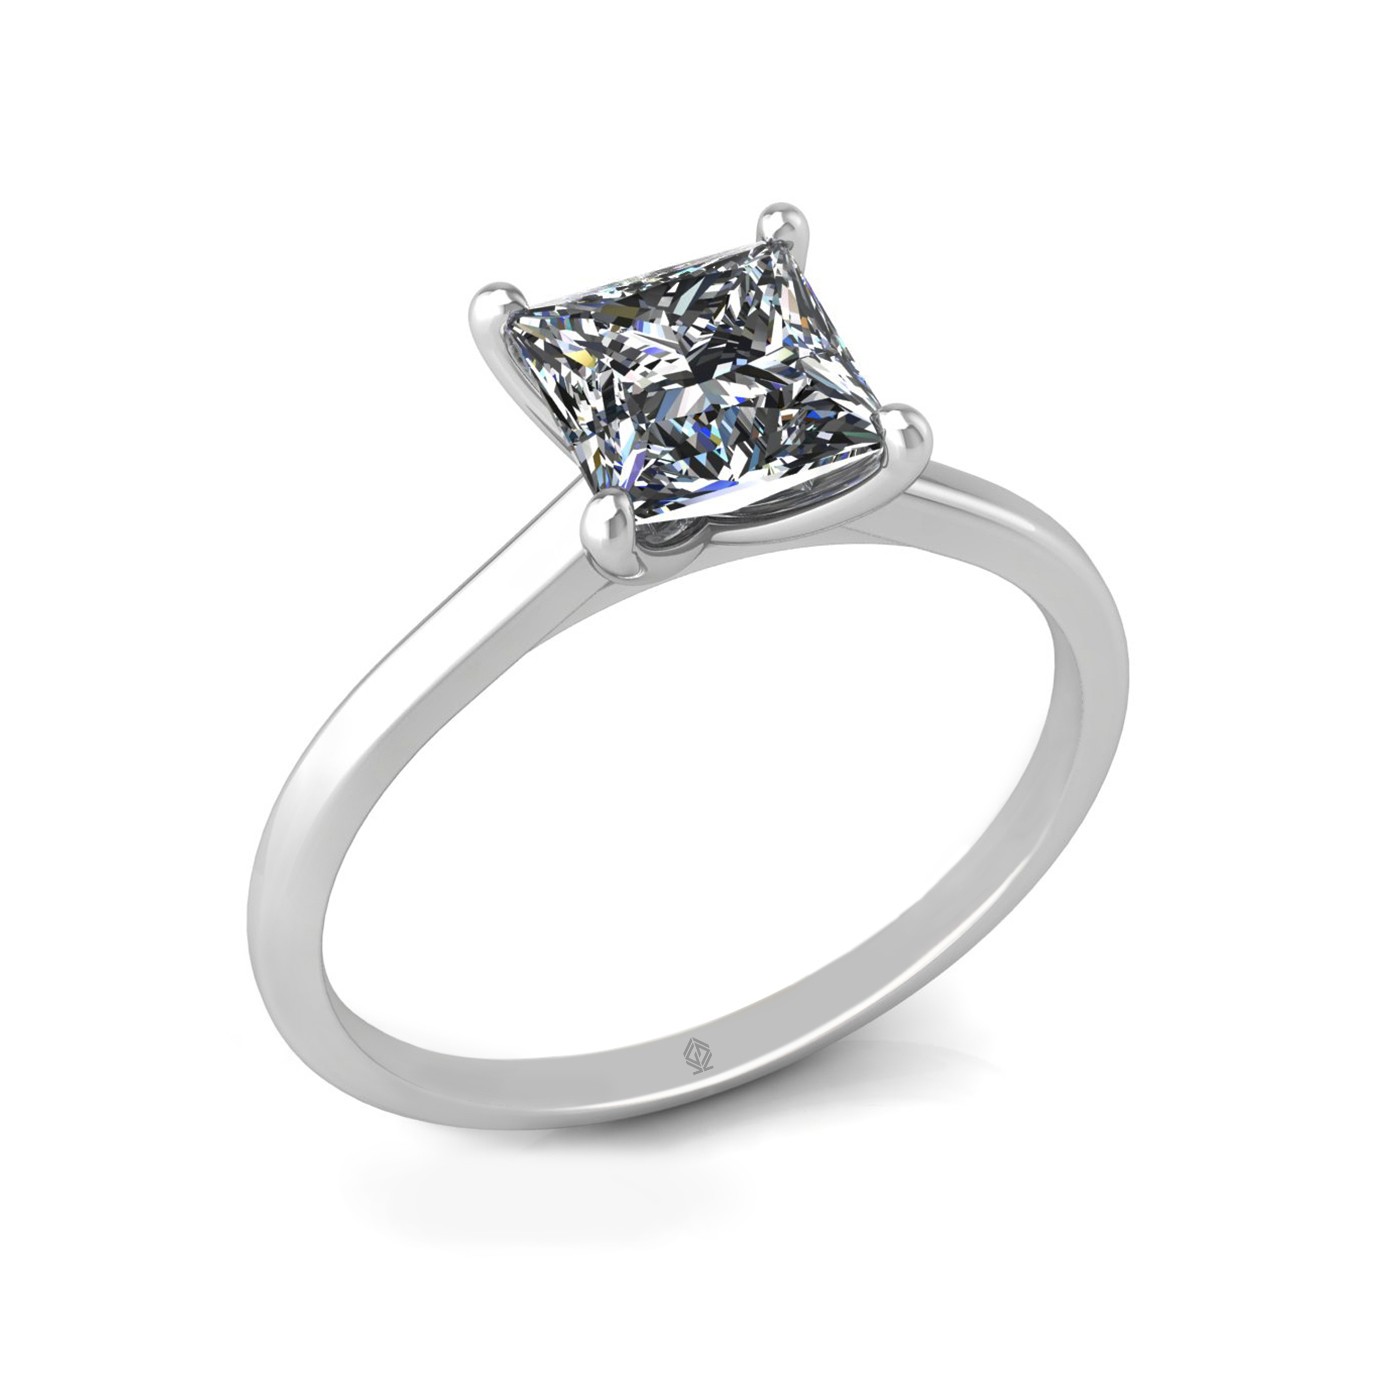 18k white gold  1,20 ct 4 prongs solitaire princess cut diamond engagement ring with whisper thin band